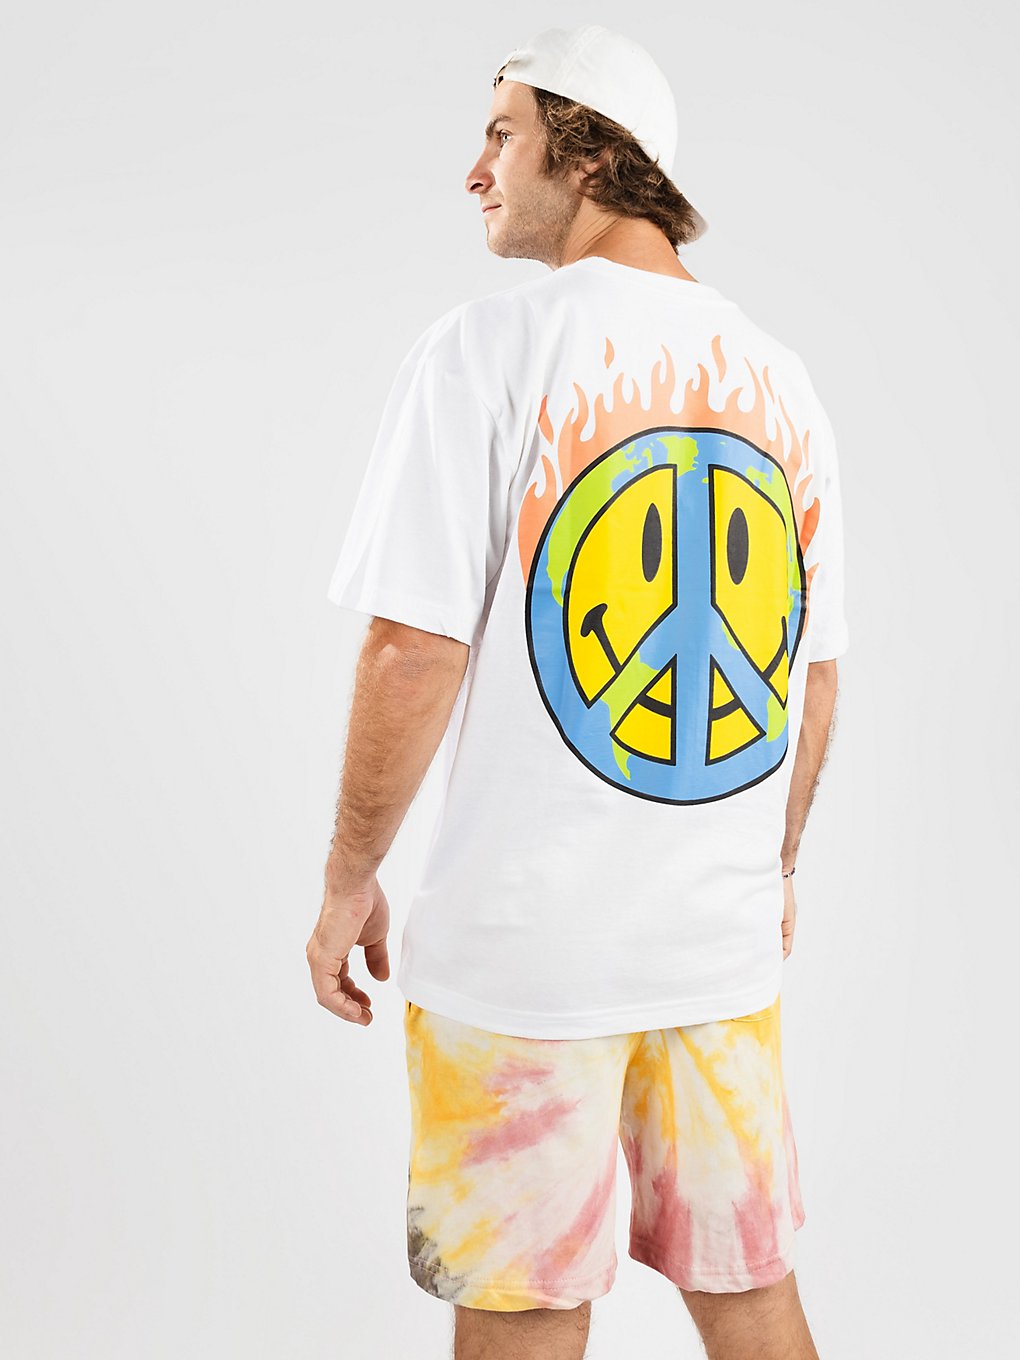 Market Smiley Earth On Fire T-Shirt white kaufen